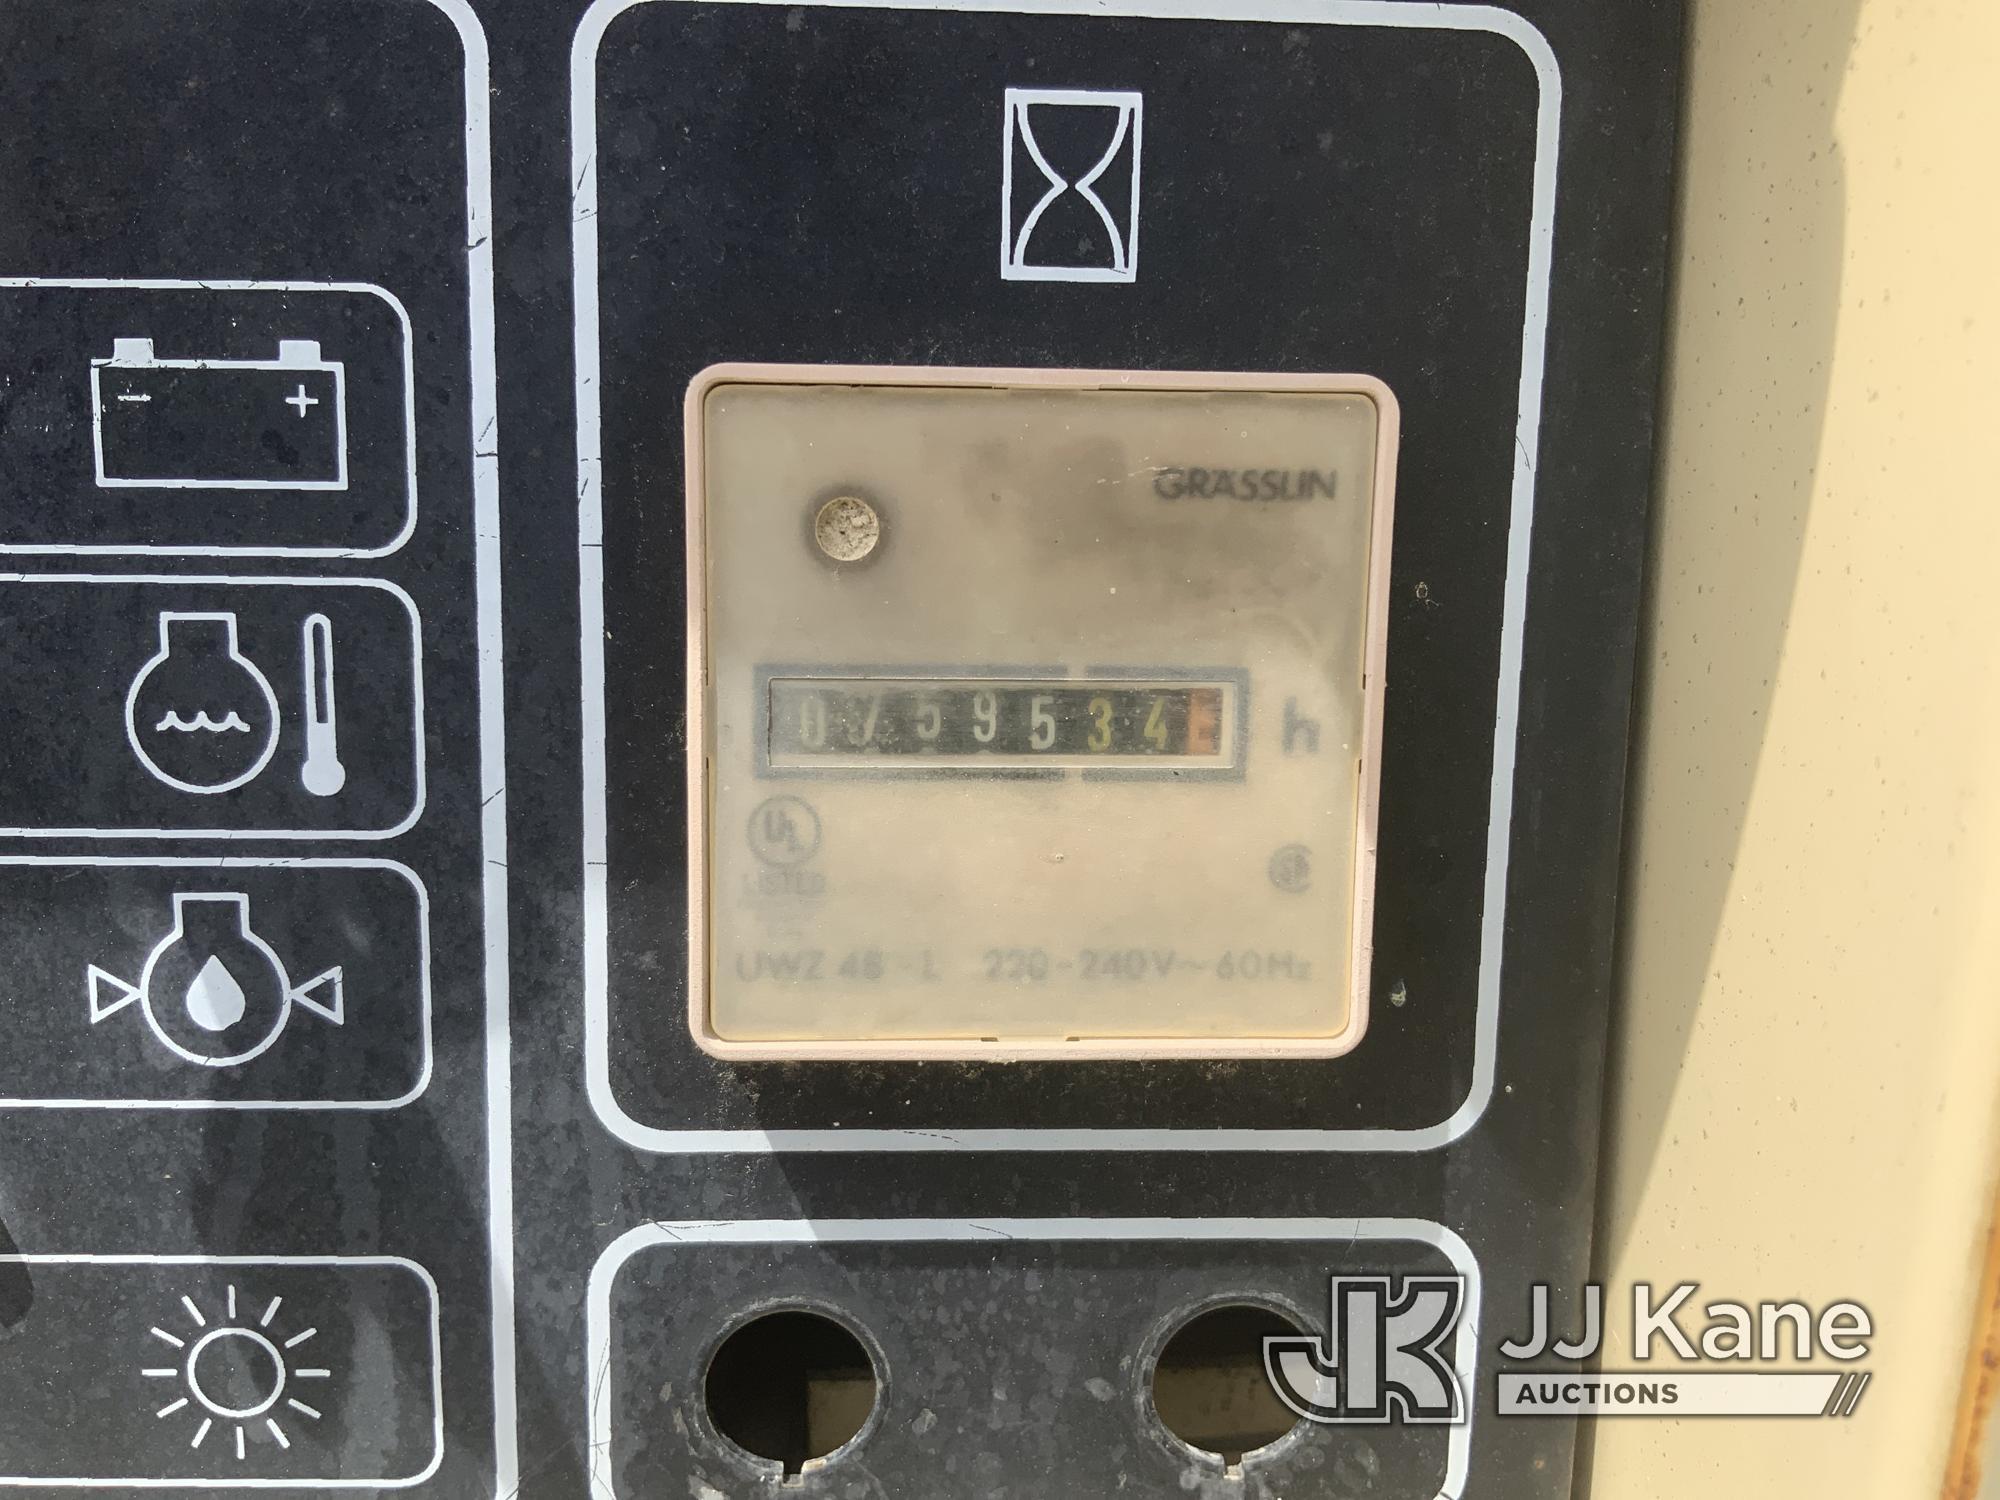 (Hawk Point, MO) Ingersoll Rand Generator Not Running, Condition Unknown) (No response From ignition